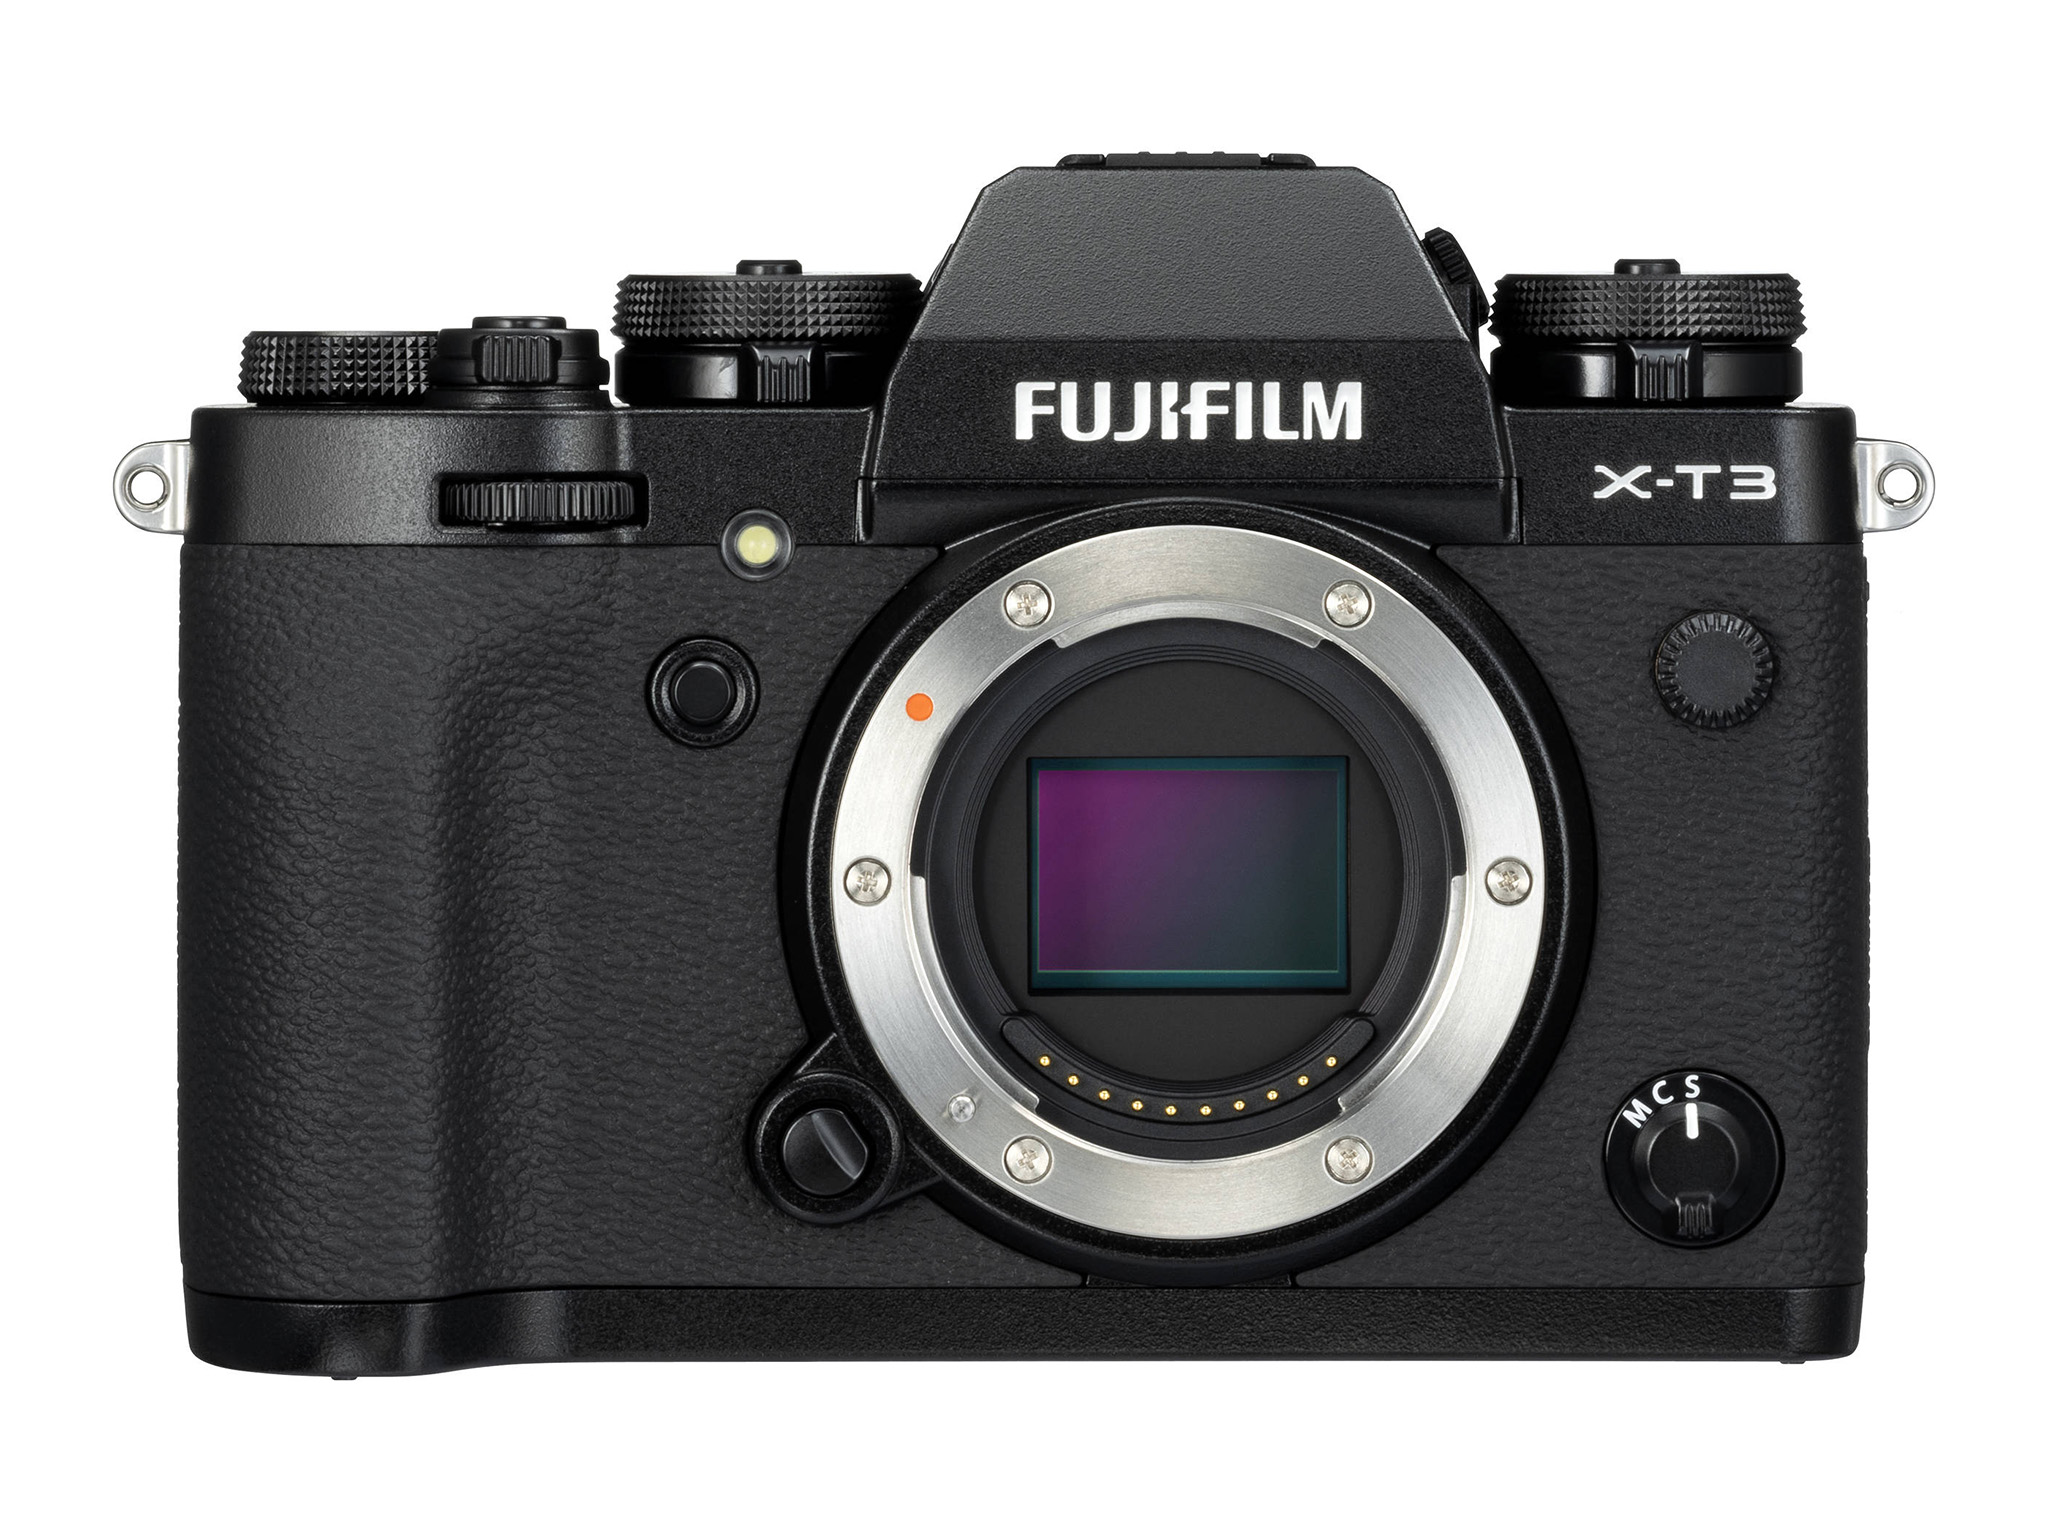 Recommended Fuji X T3 Settings